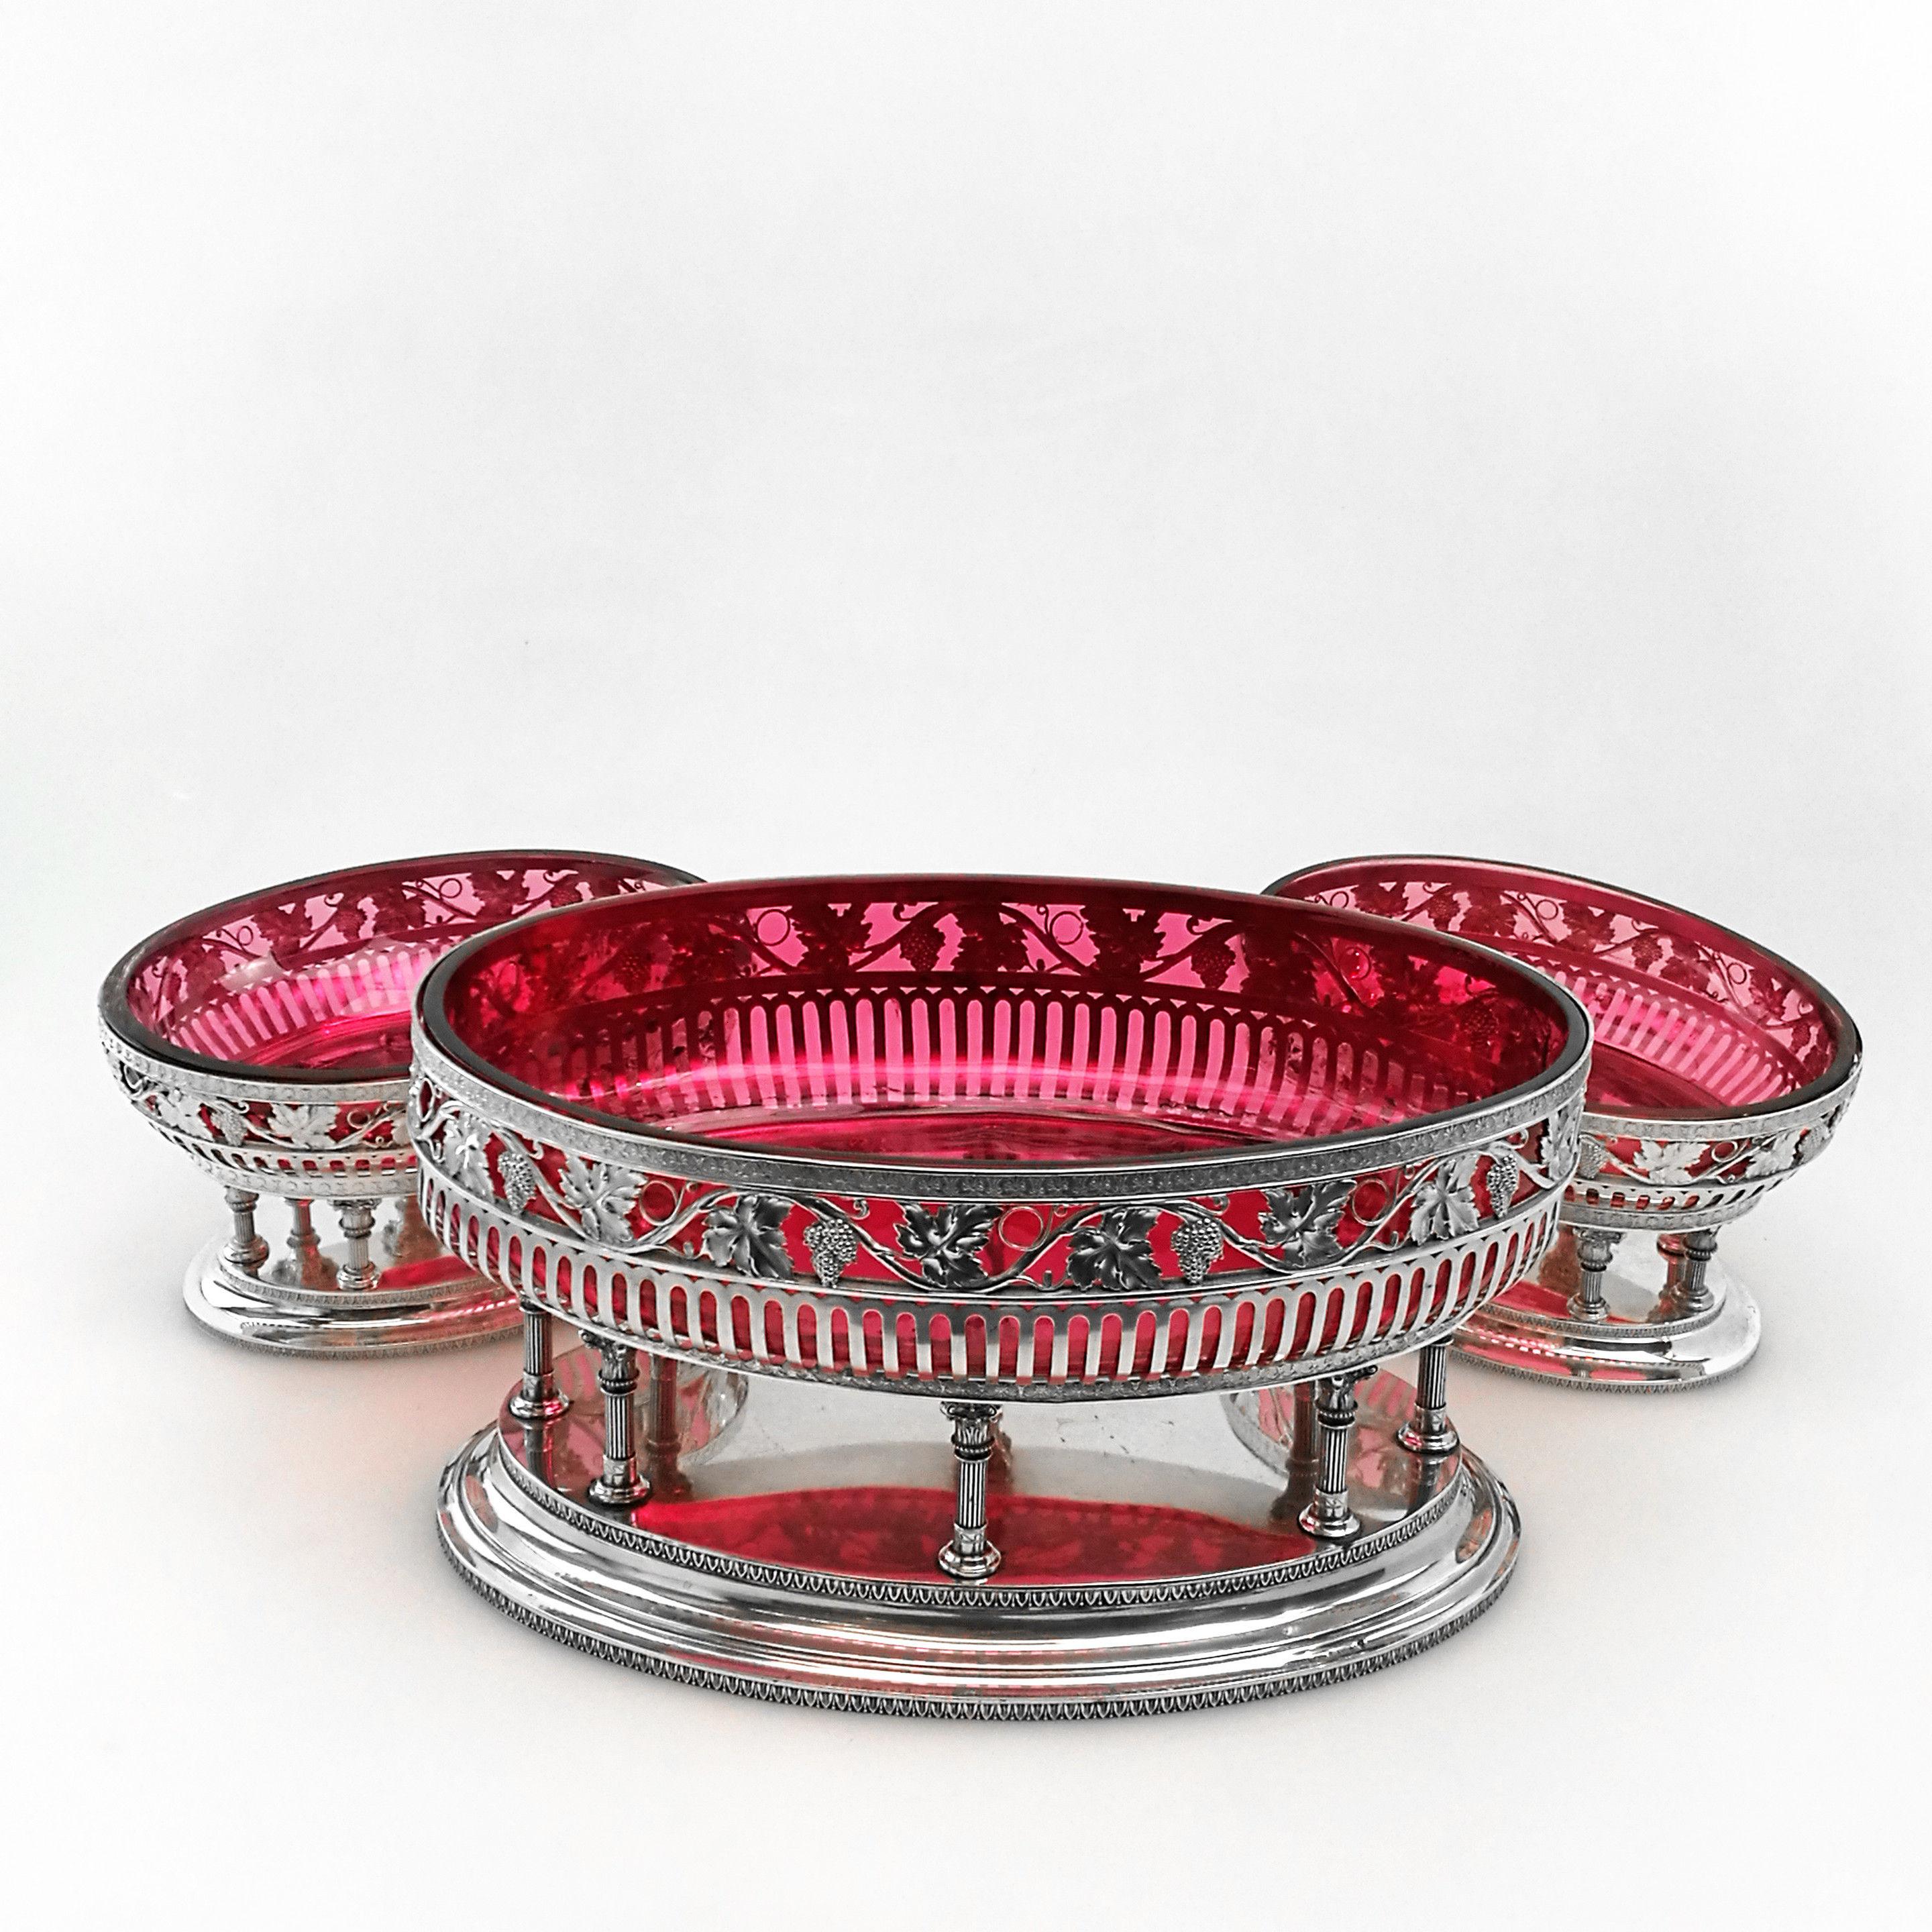 A set of three Antique solid Silver Comports with deep red claret colored glass liners. The set consists of one large oval shaped dish and two matched smaller oval dishes. Each dish has a solid oval pedestal foot and the dishes rest on a series of